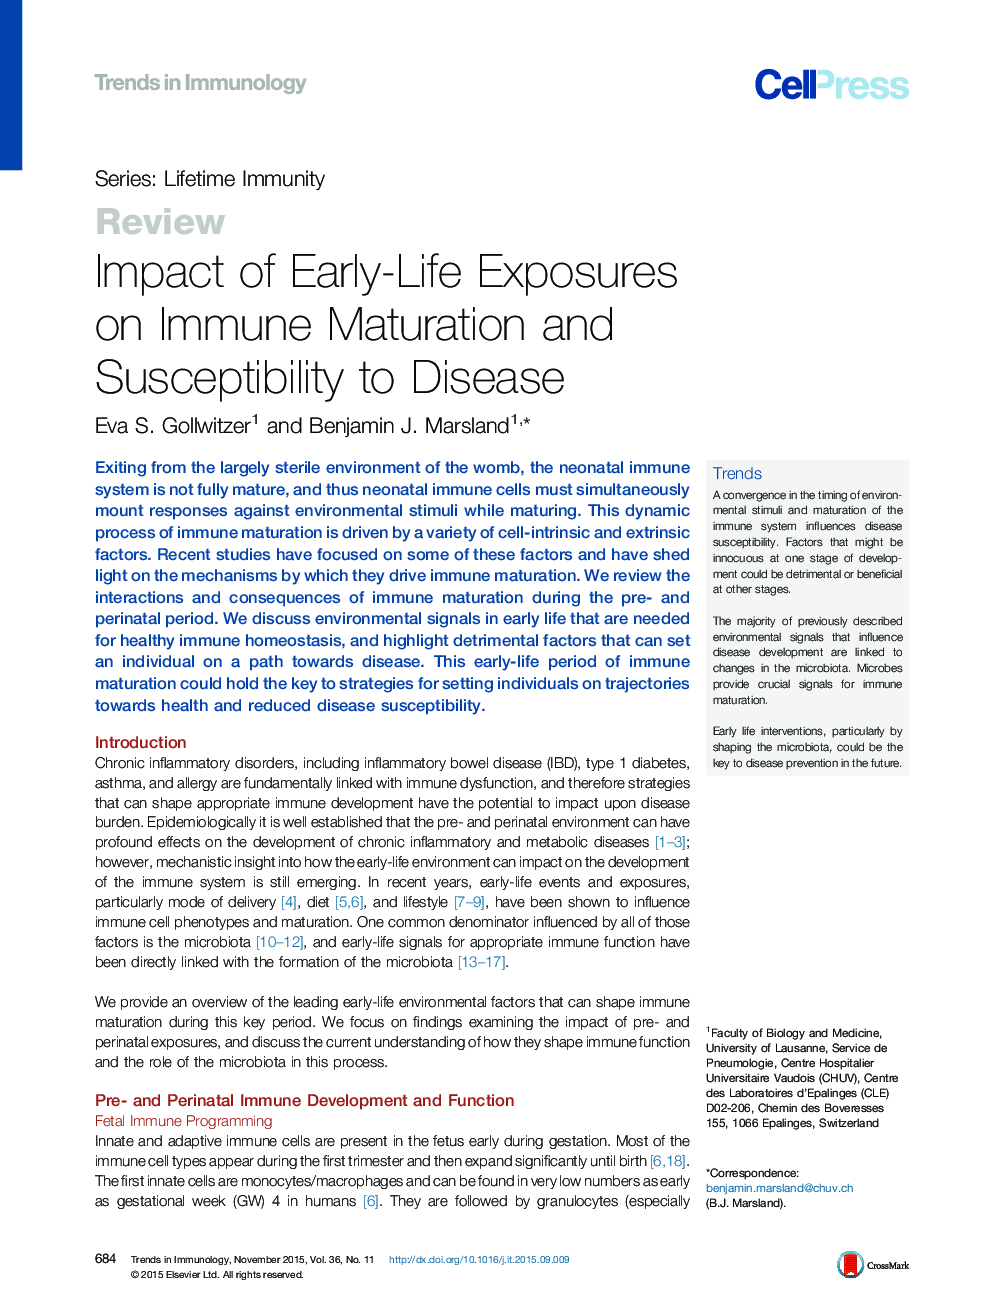 Impact of Early-Life Exposures on Immune Maturation and Susceptibility to Disease